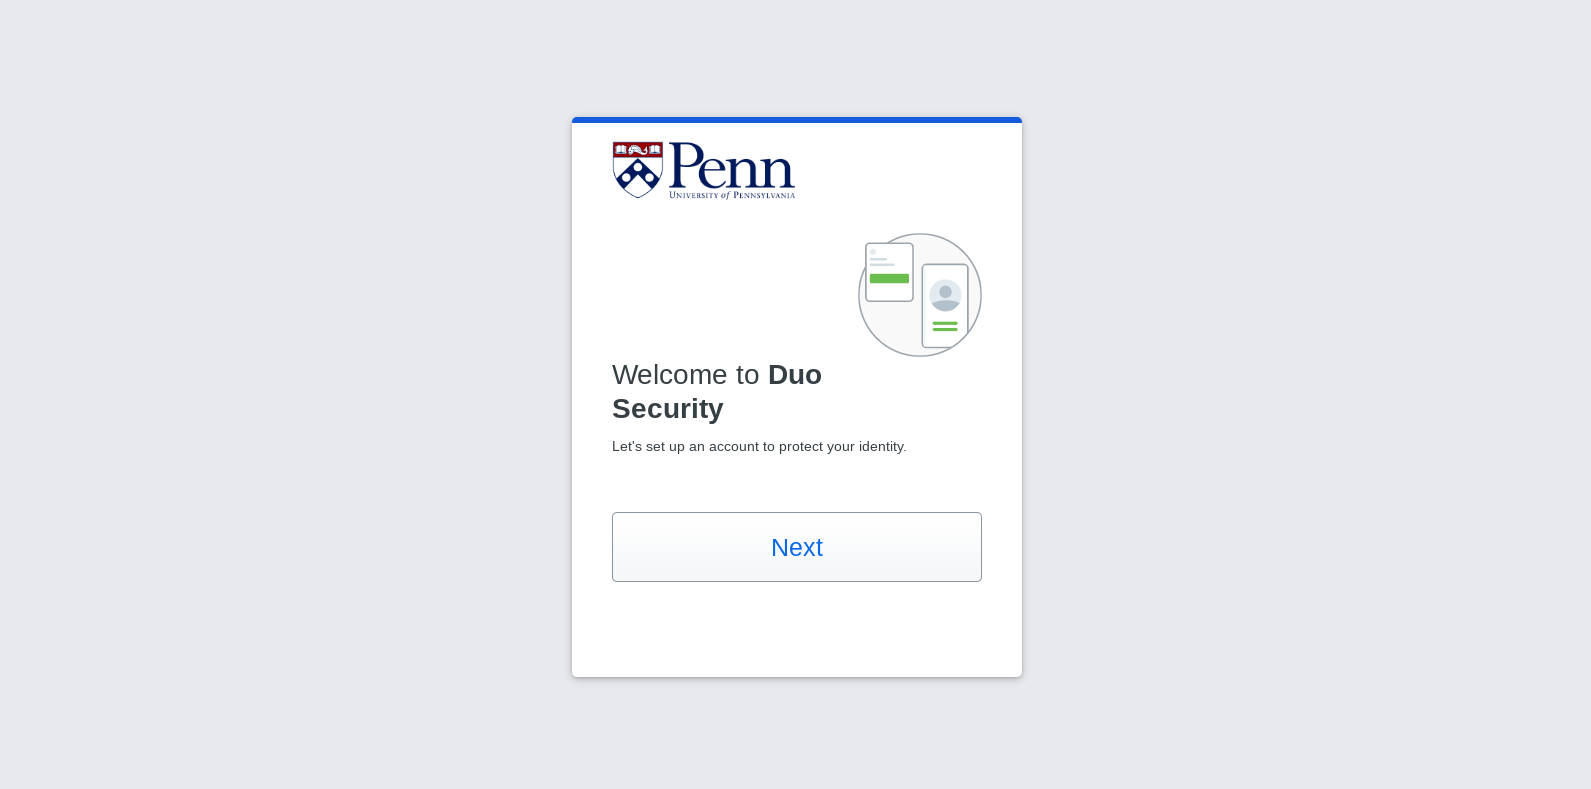 Duo enrollment start screen. It says Welcome to Duo Security followed by a Next button.